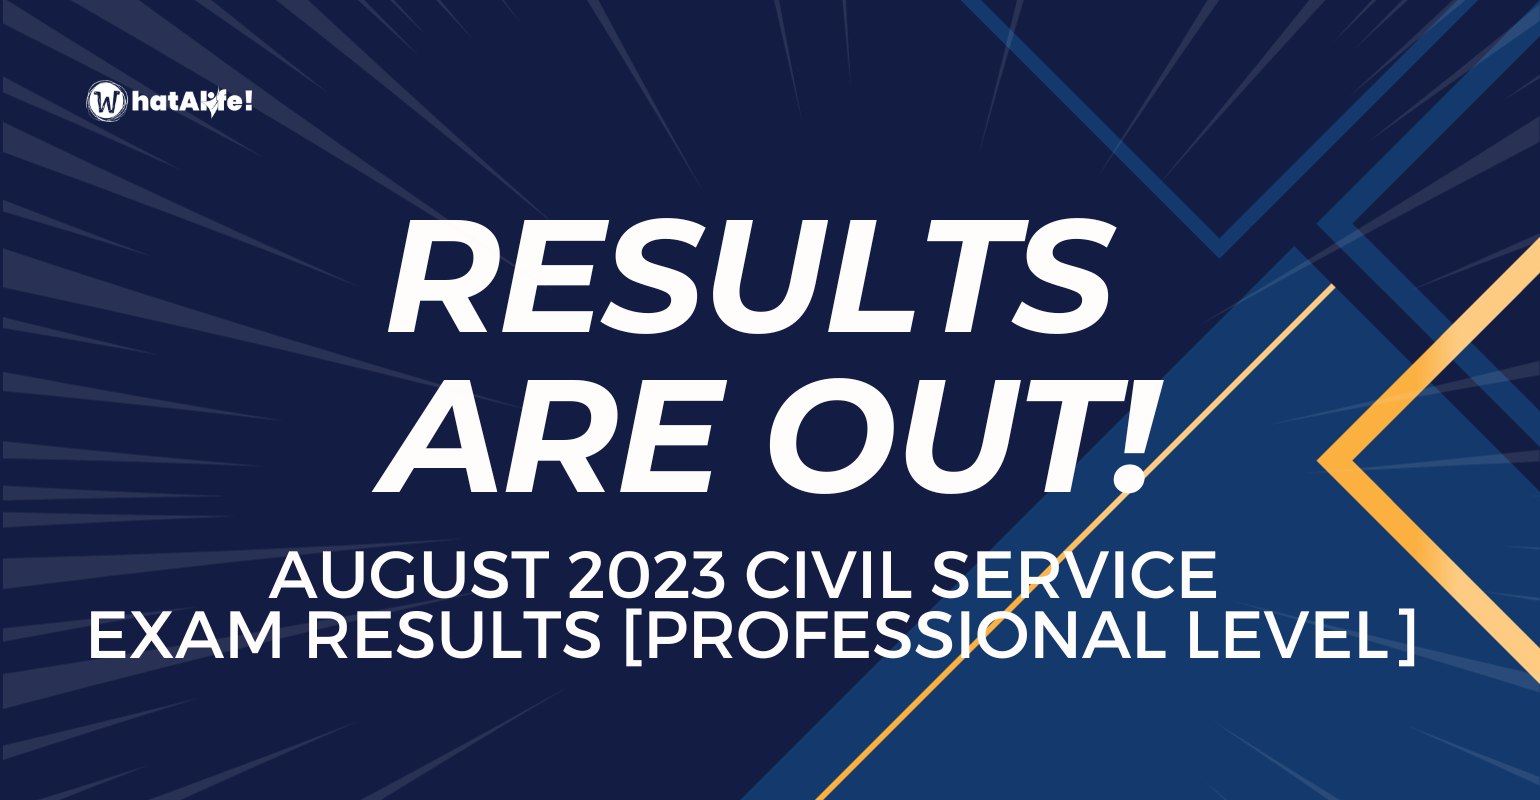 List of Passers August 2023 Civil Service Exam Results – Professional Level